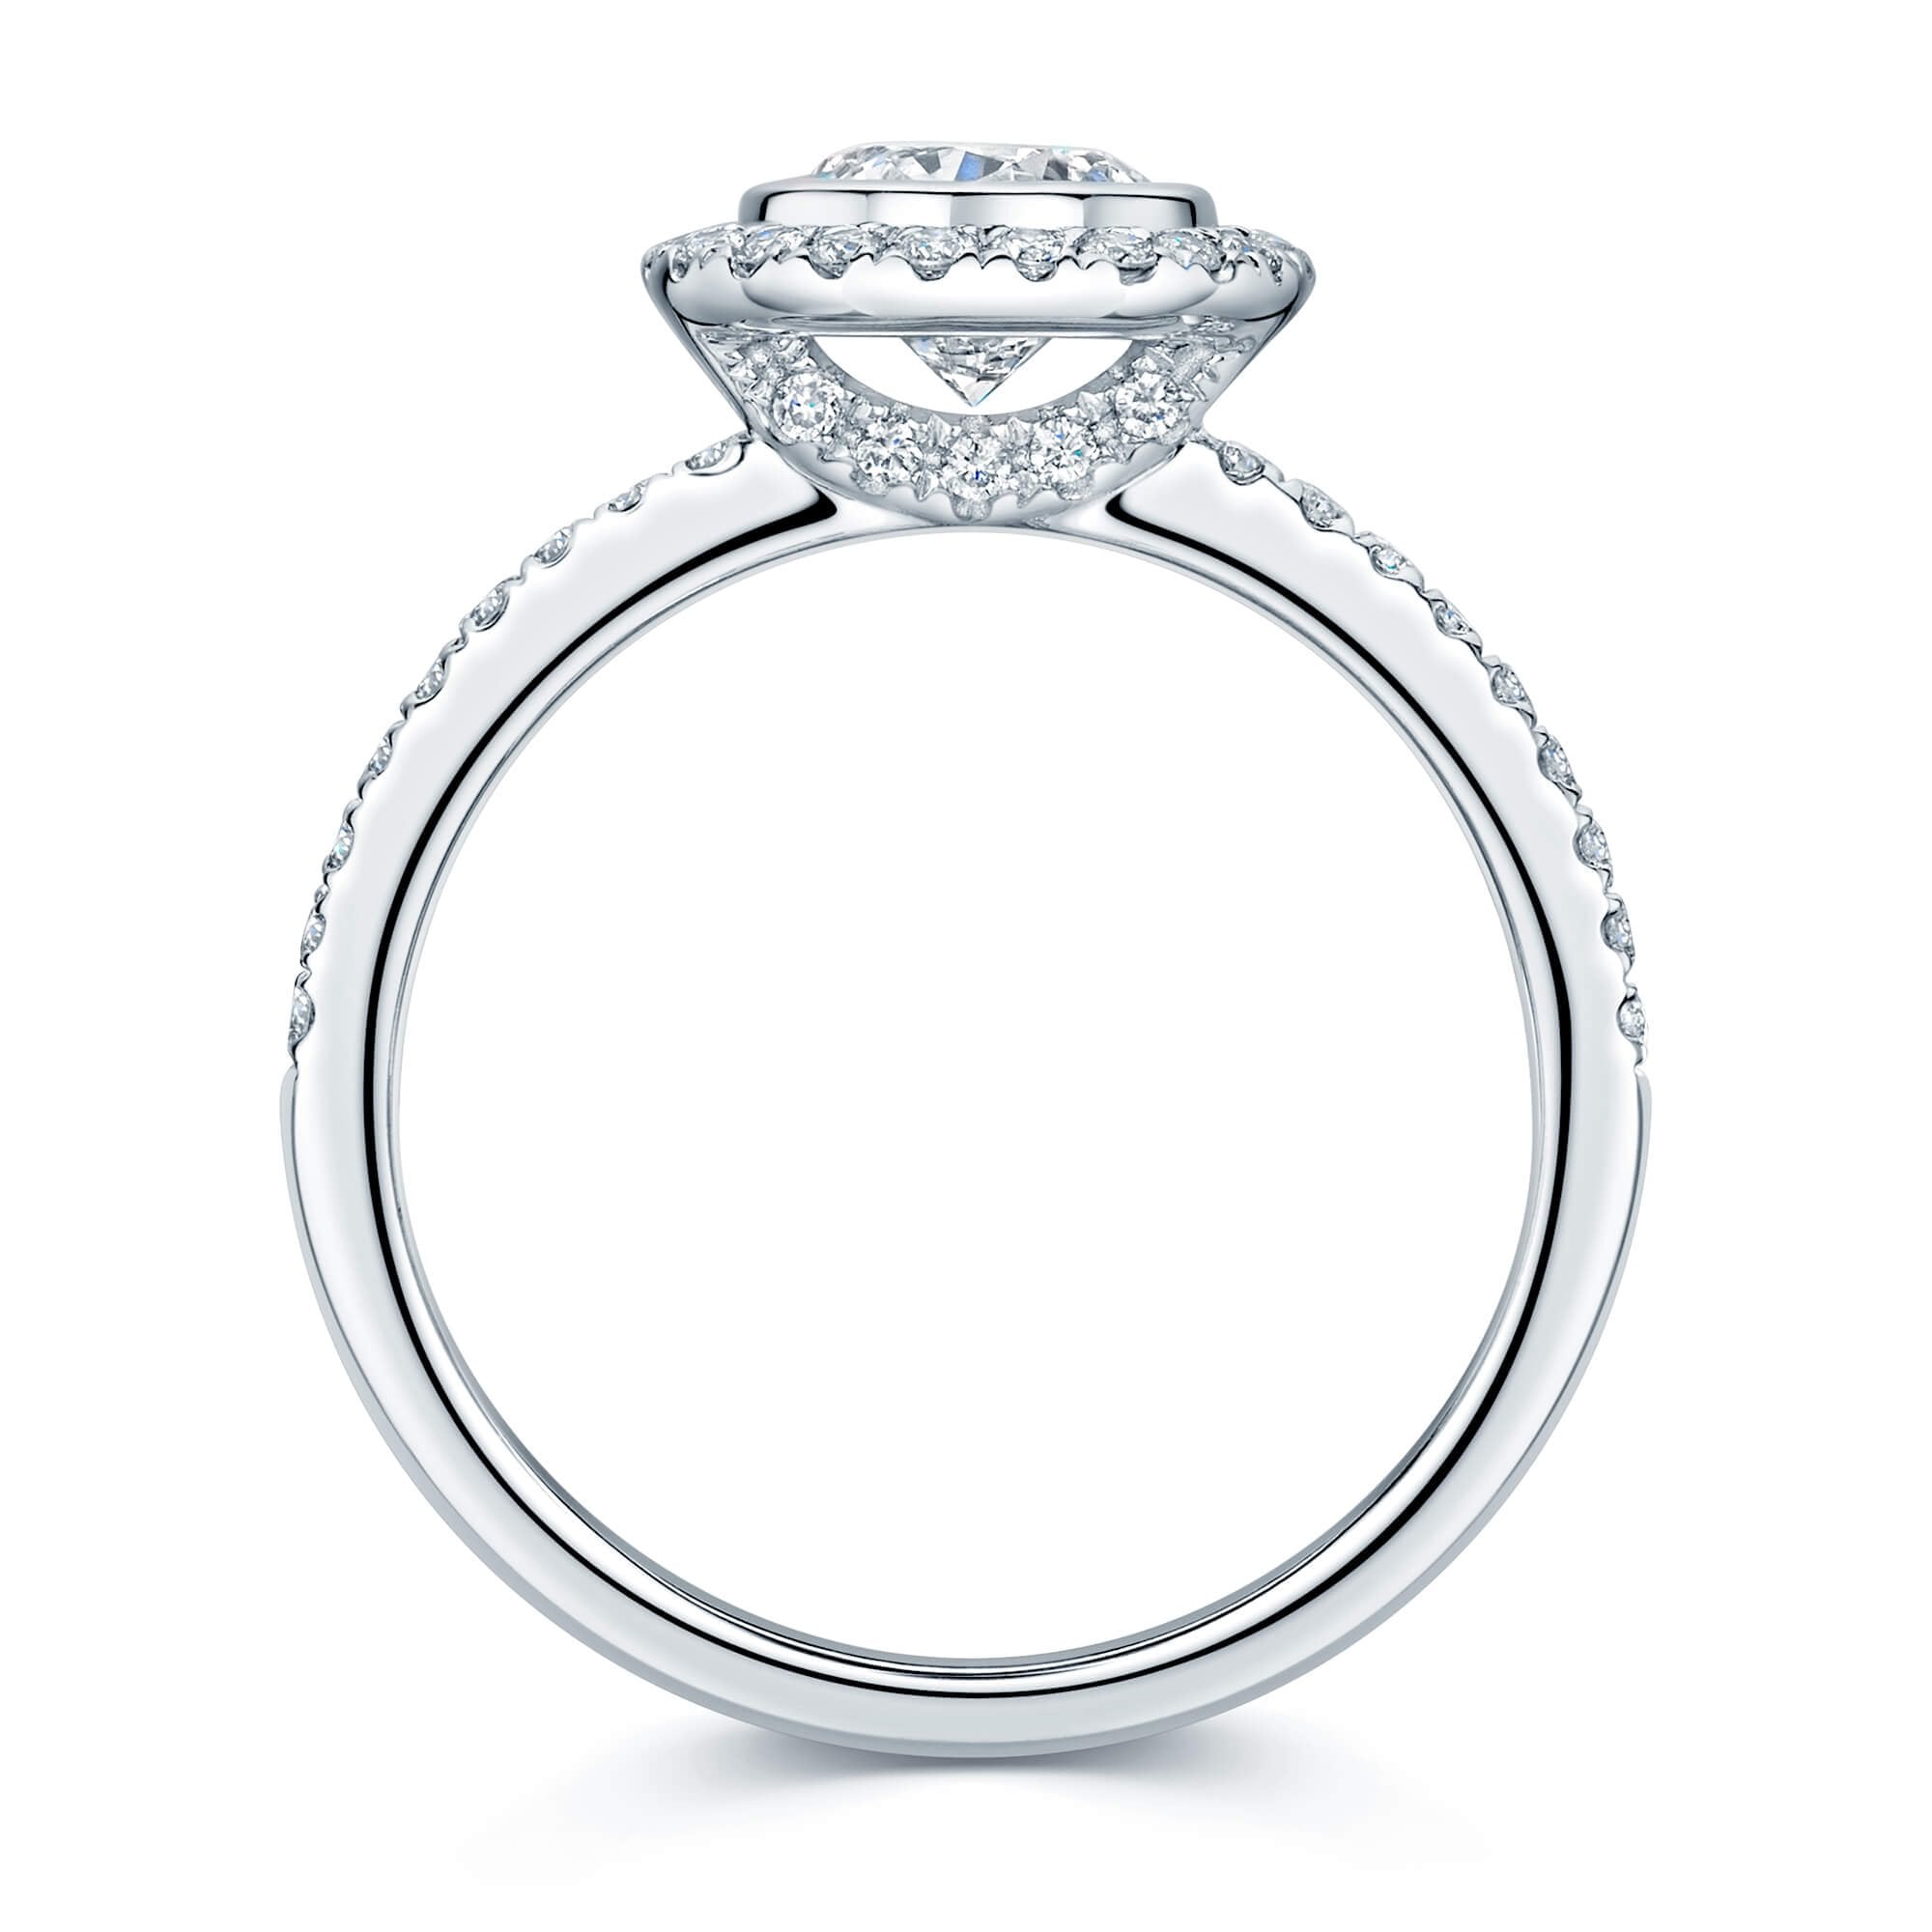 Platinum Round Brilliant Cut Diamond Ring With A Rub Over Setting And Claw Set Diamond Shoulders